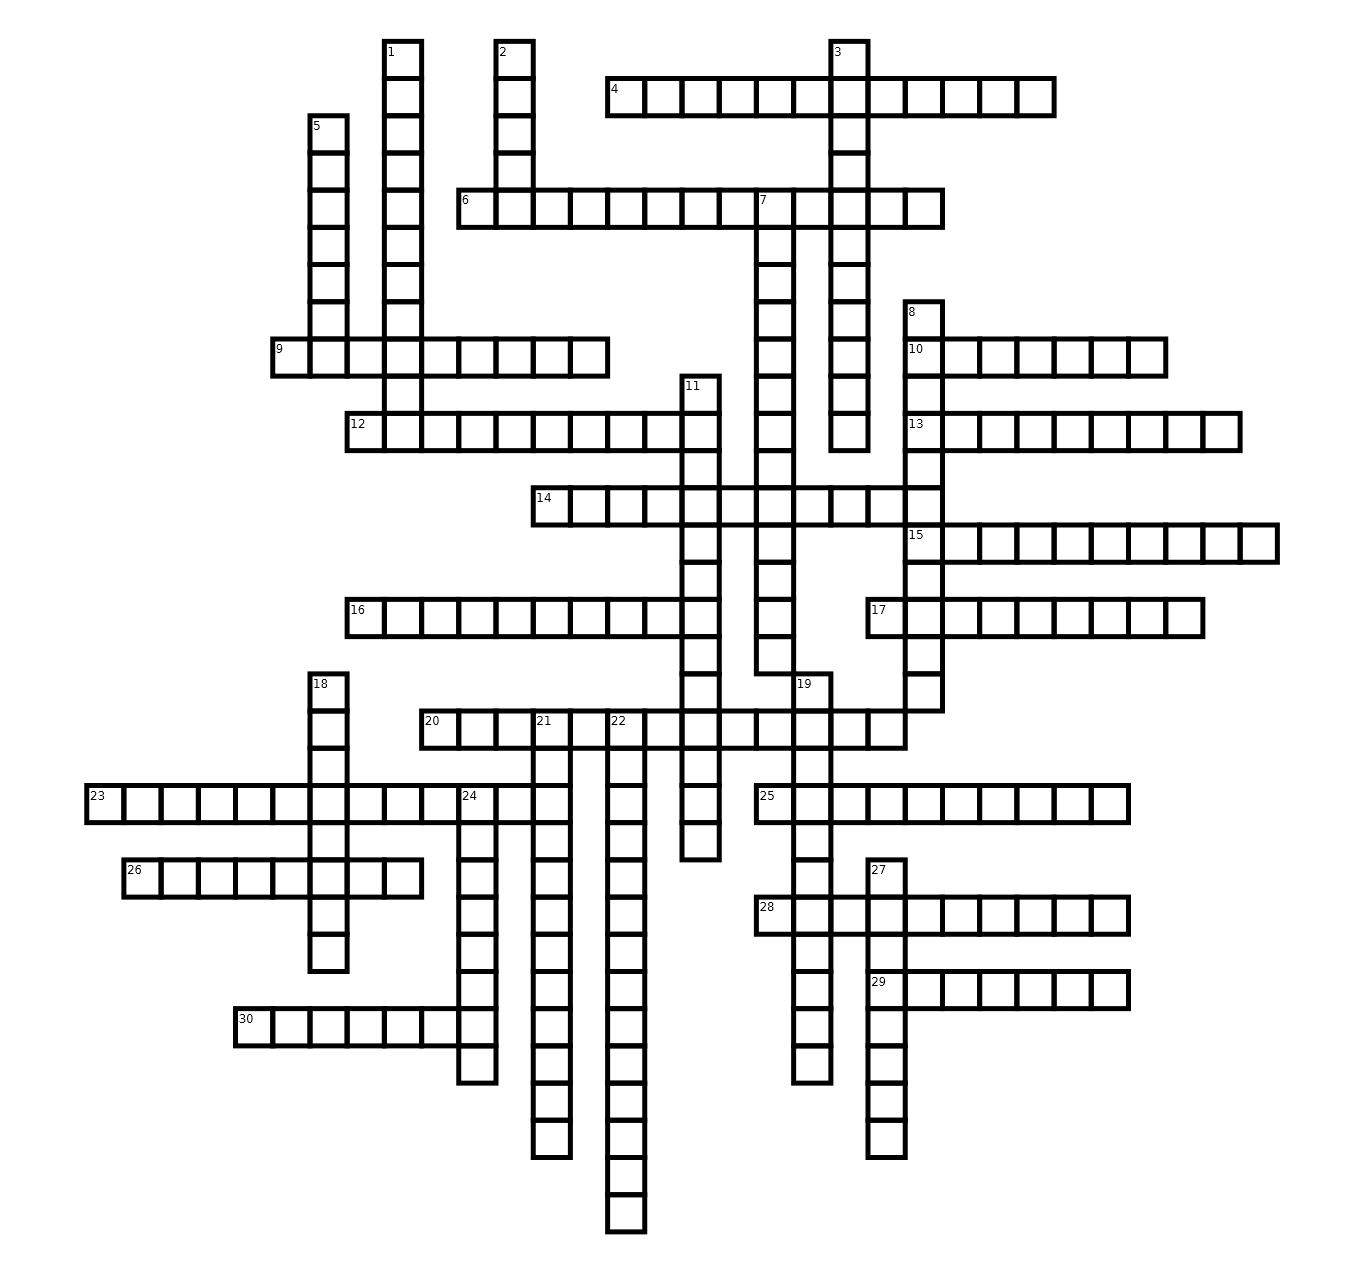 Confirmation Session 2 Crossword Crossword Labs